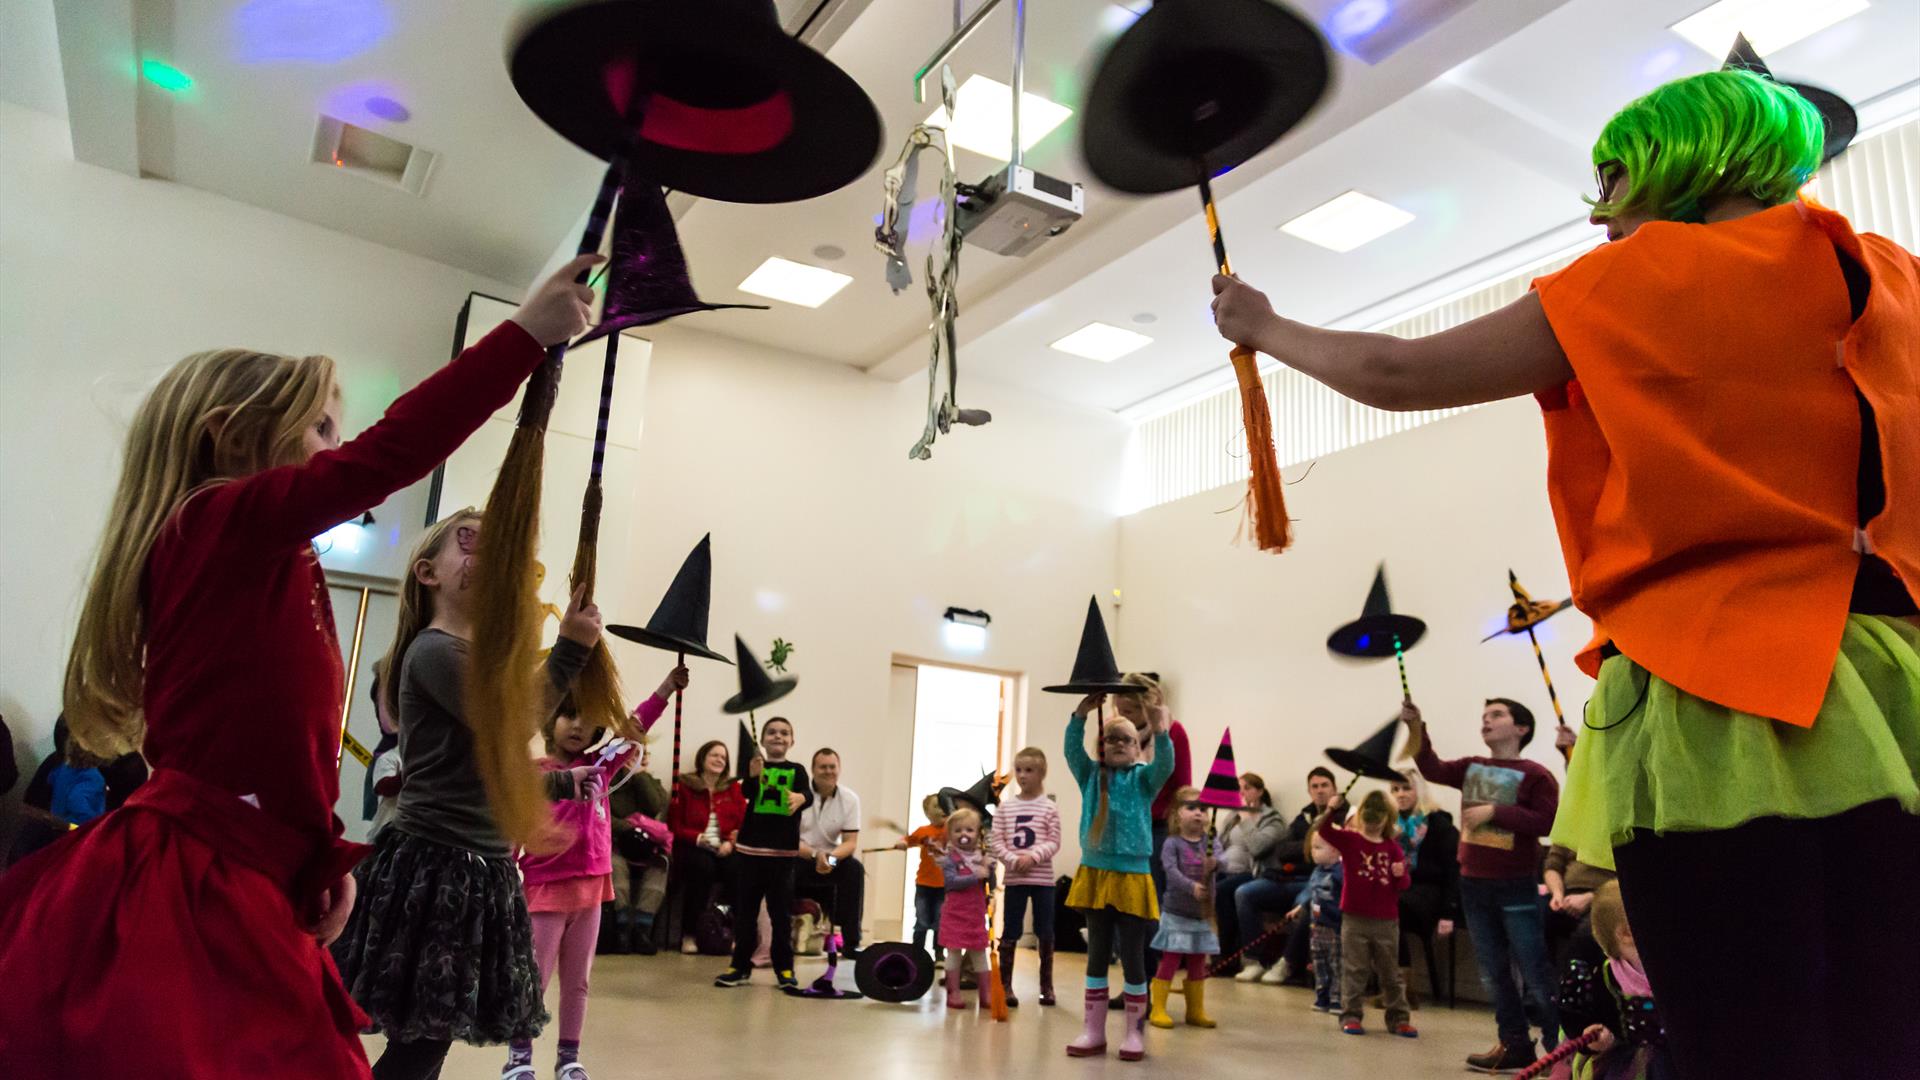 Children holding up witches hats and brooms, dressed for Hallowe'en